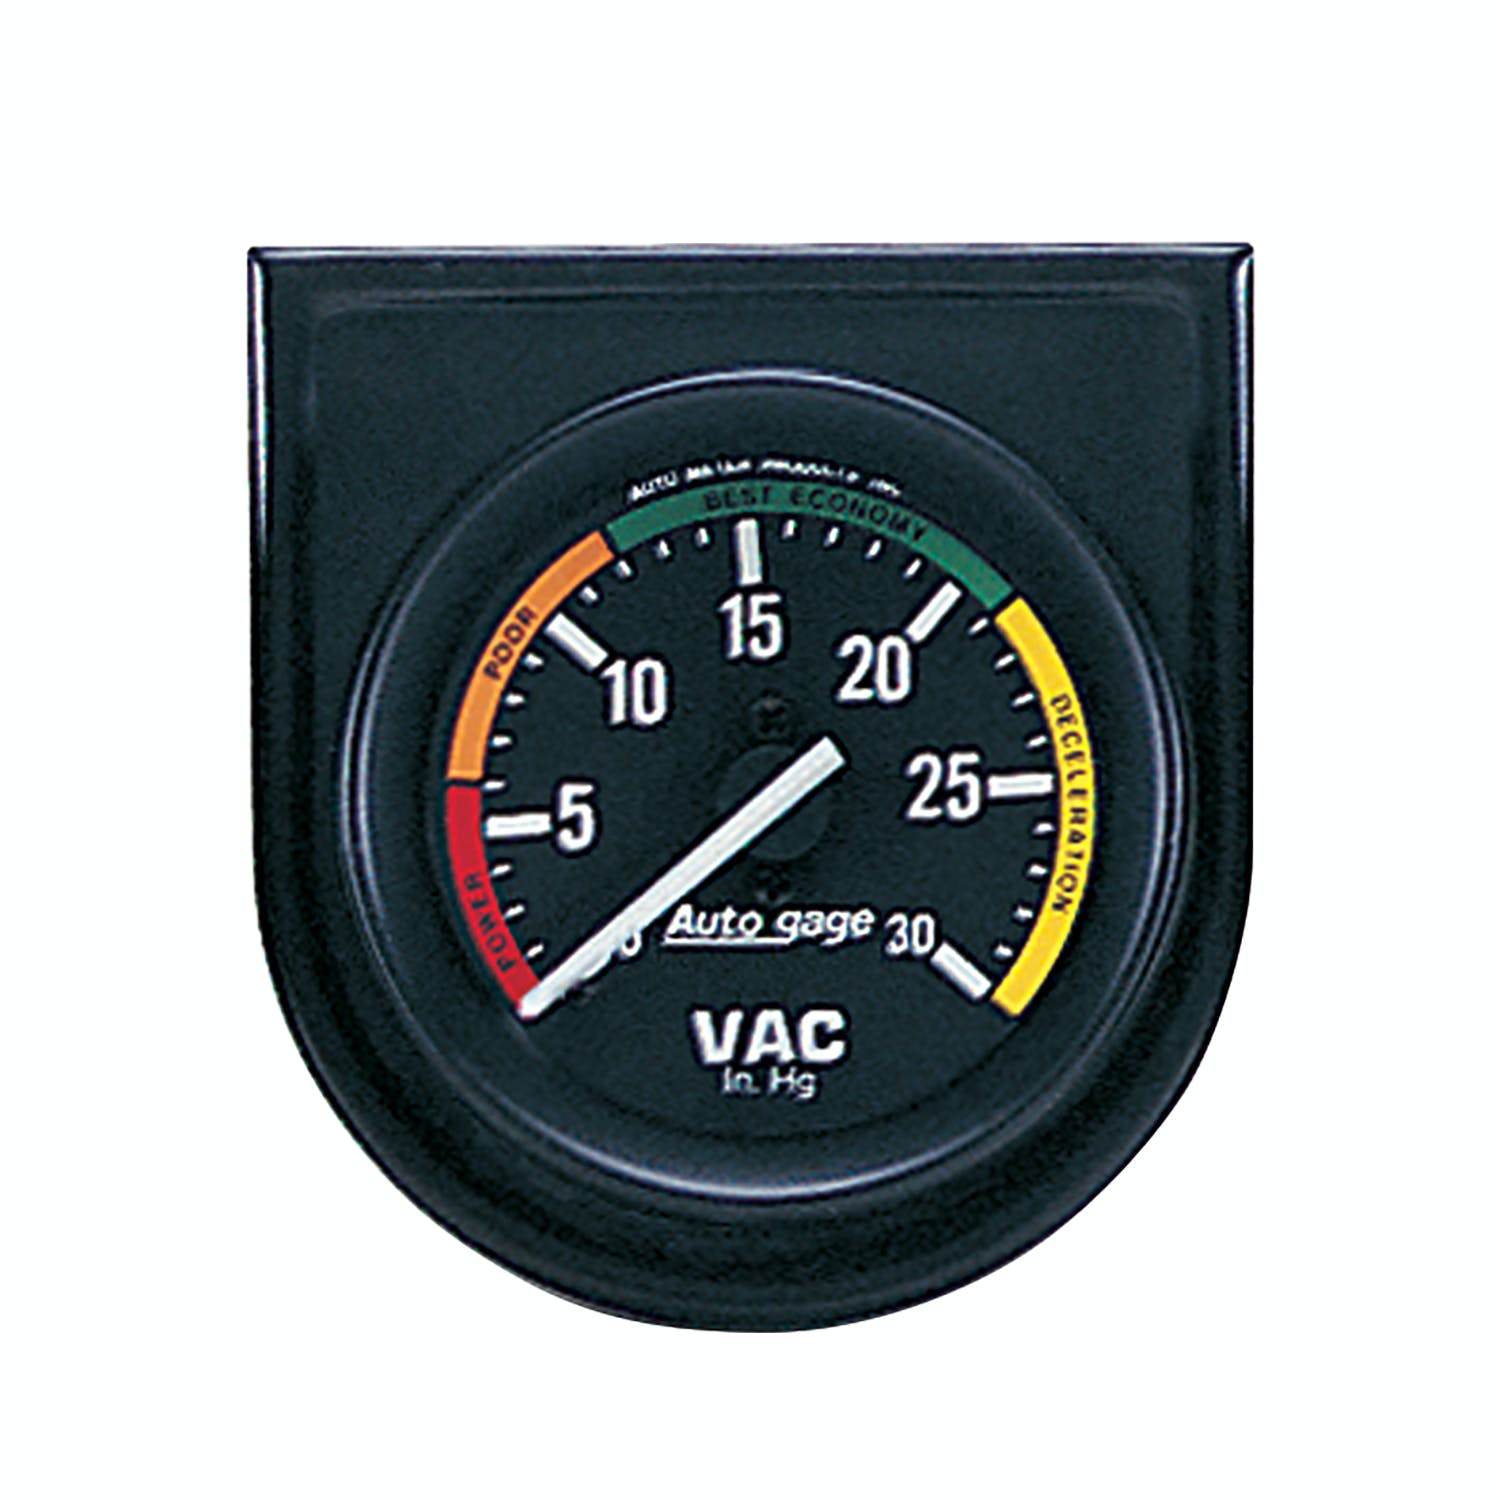 AutoMeter Products 2337 Autogage Vacuum Gauge Panel 2 1/16 in. 30 in.